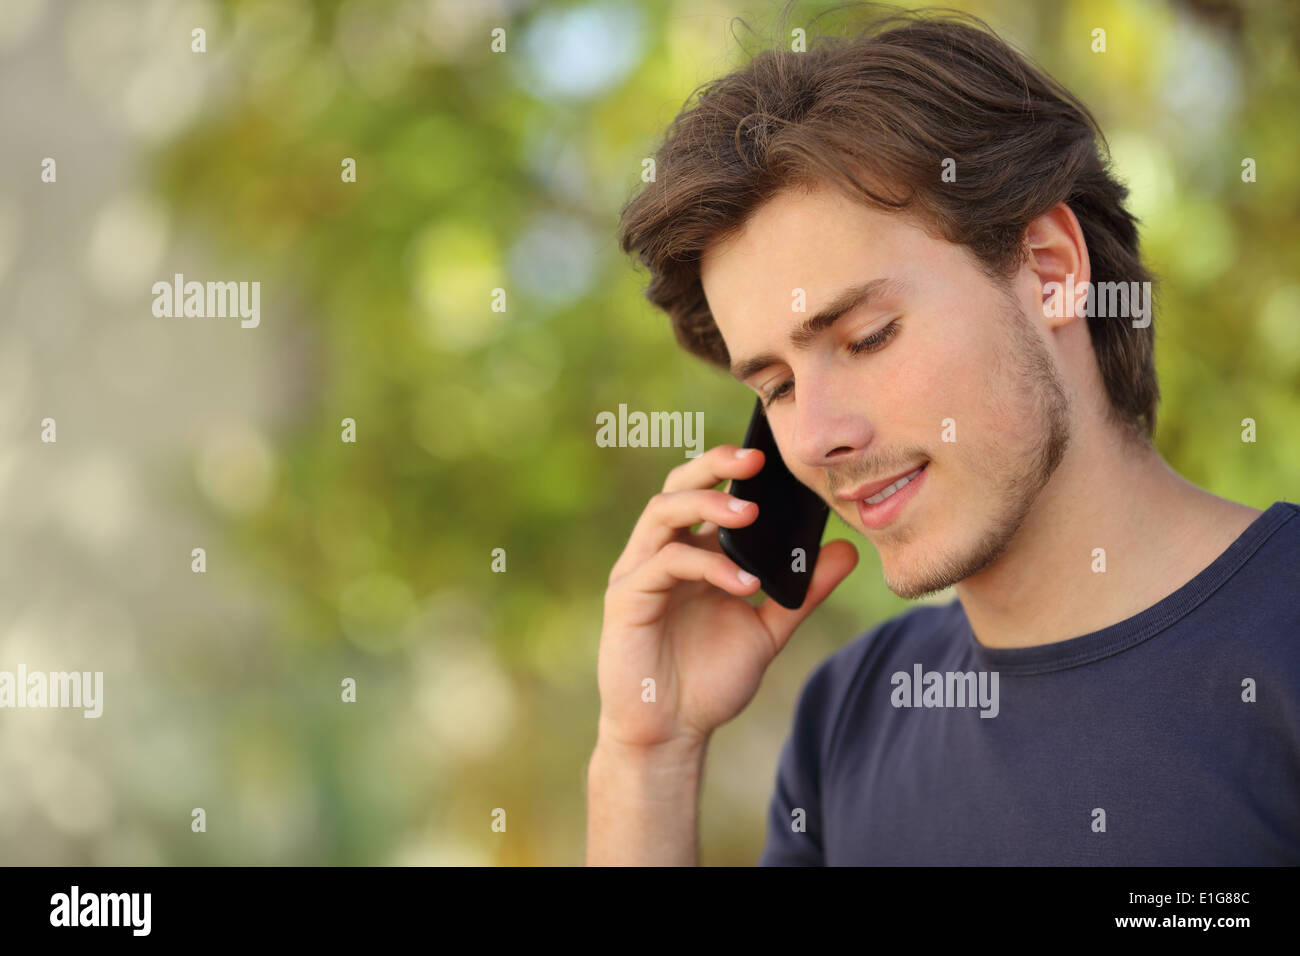 Handsome man talking on the mobile phone outdoor with green background Stock Photo